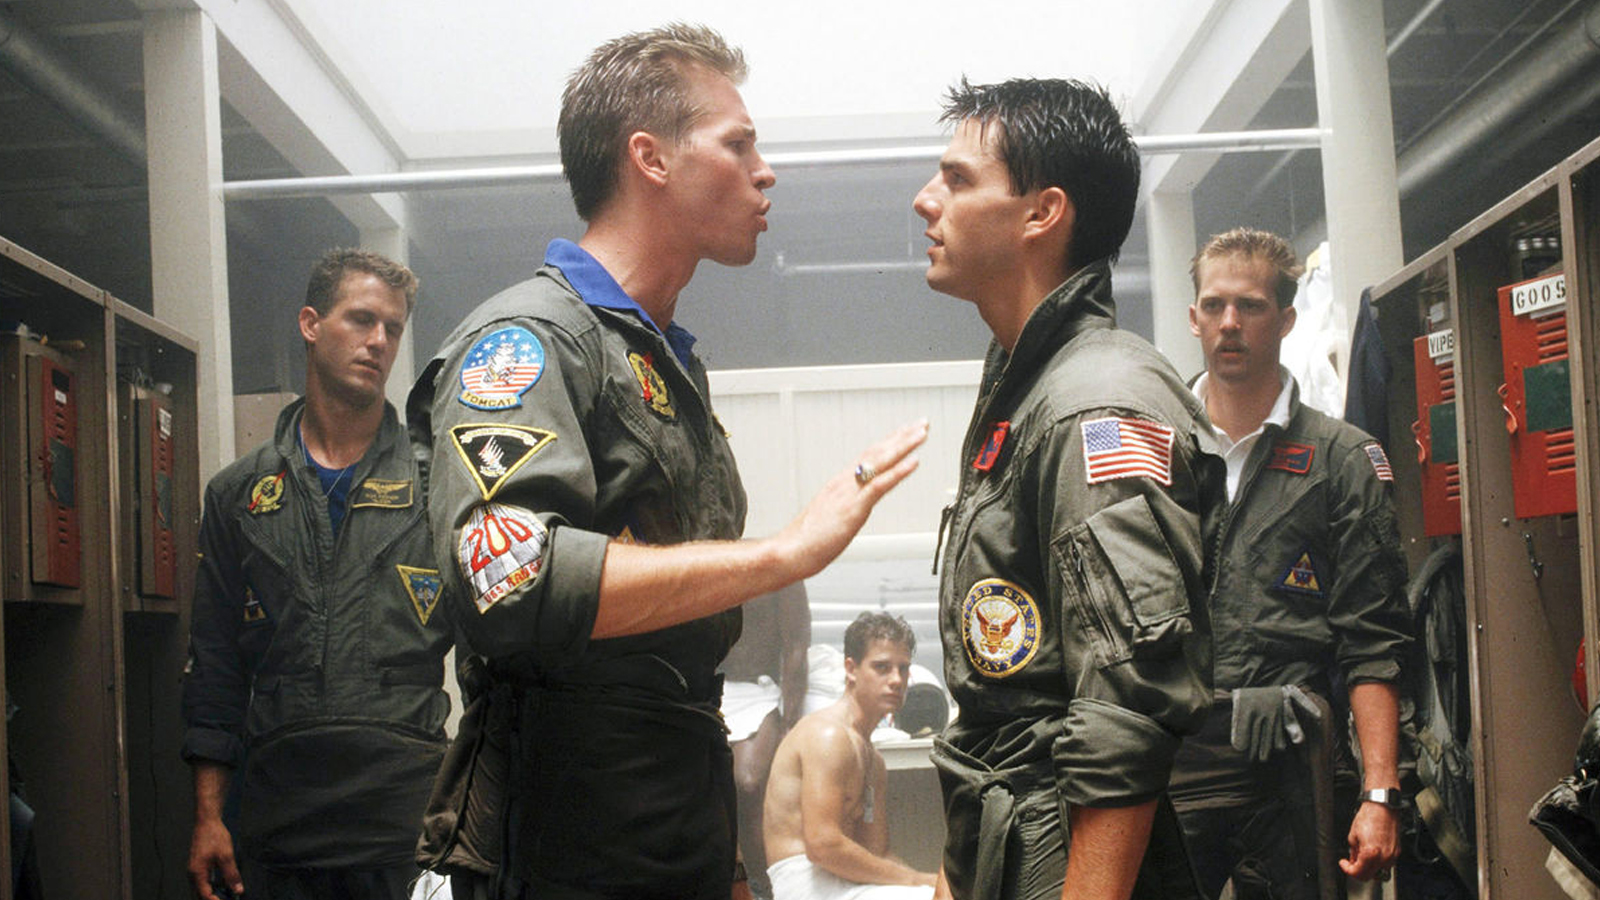 Most Iconic Top Gun Scene Almost Got Director Fired